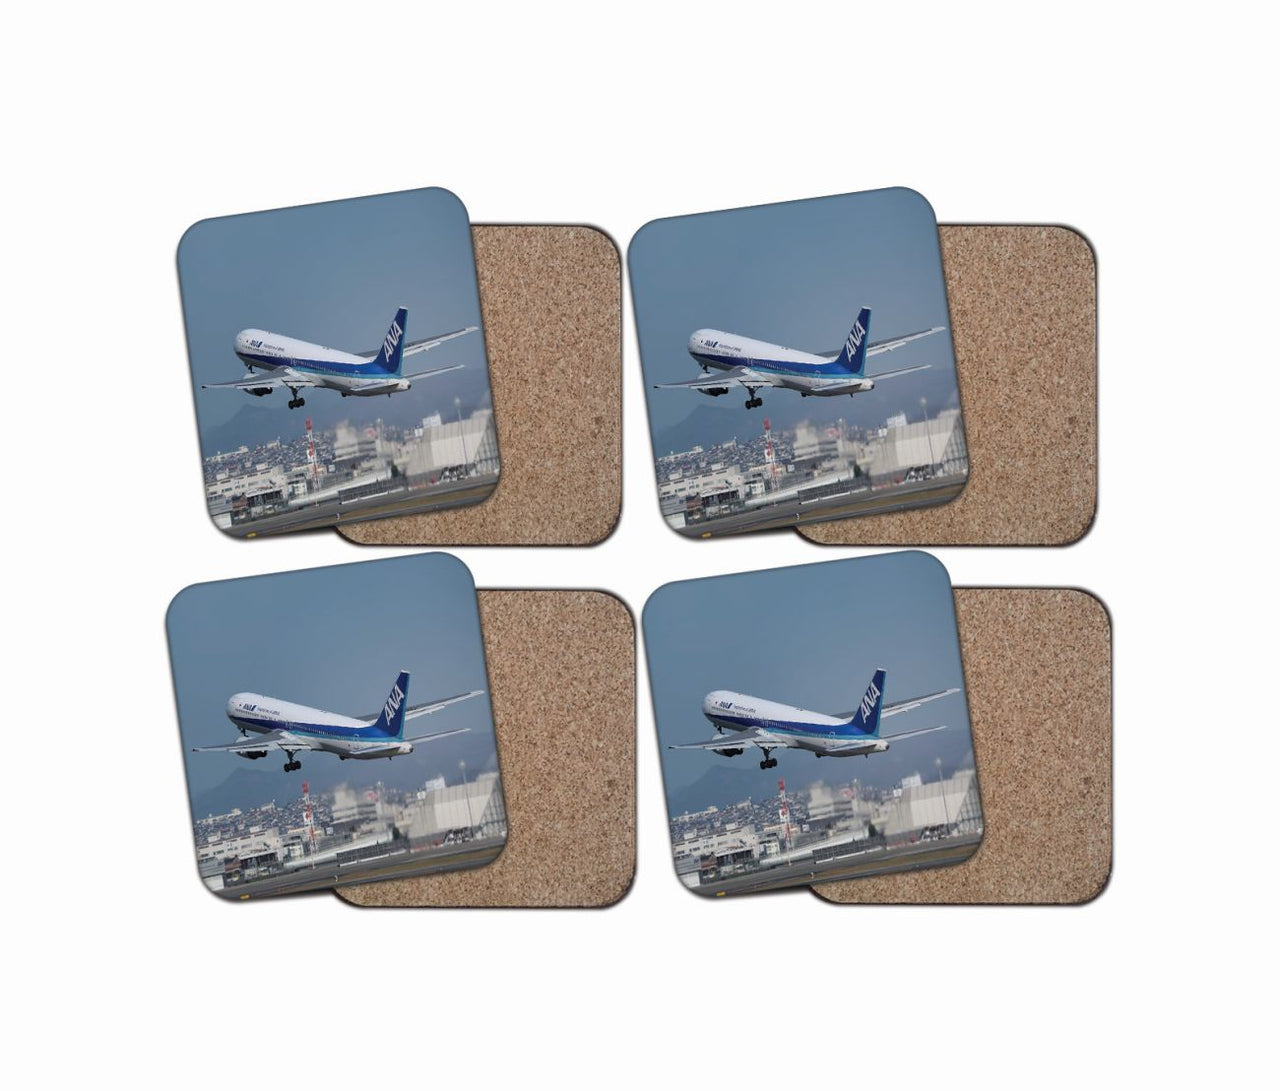 Departing ANA's Boeing 767 Designed Coasters